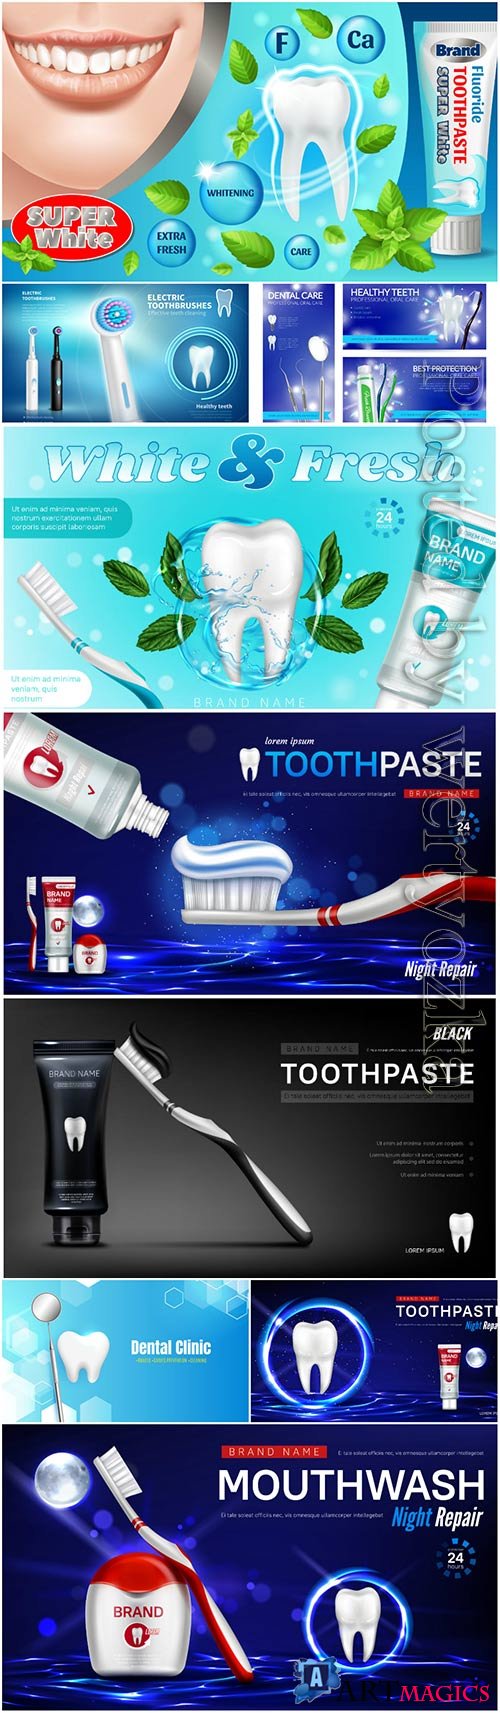 Toothpaste advertising vector posters, dentistry